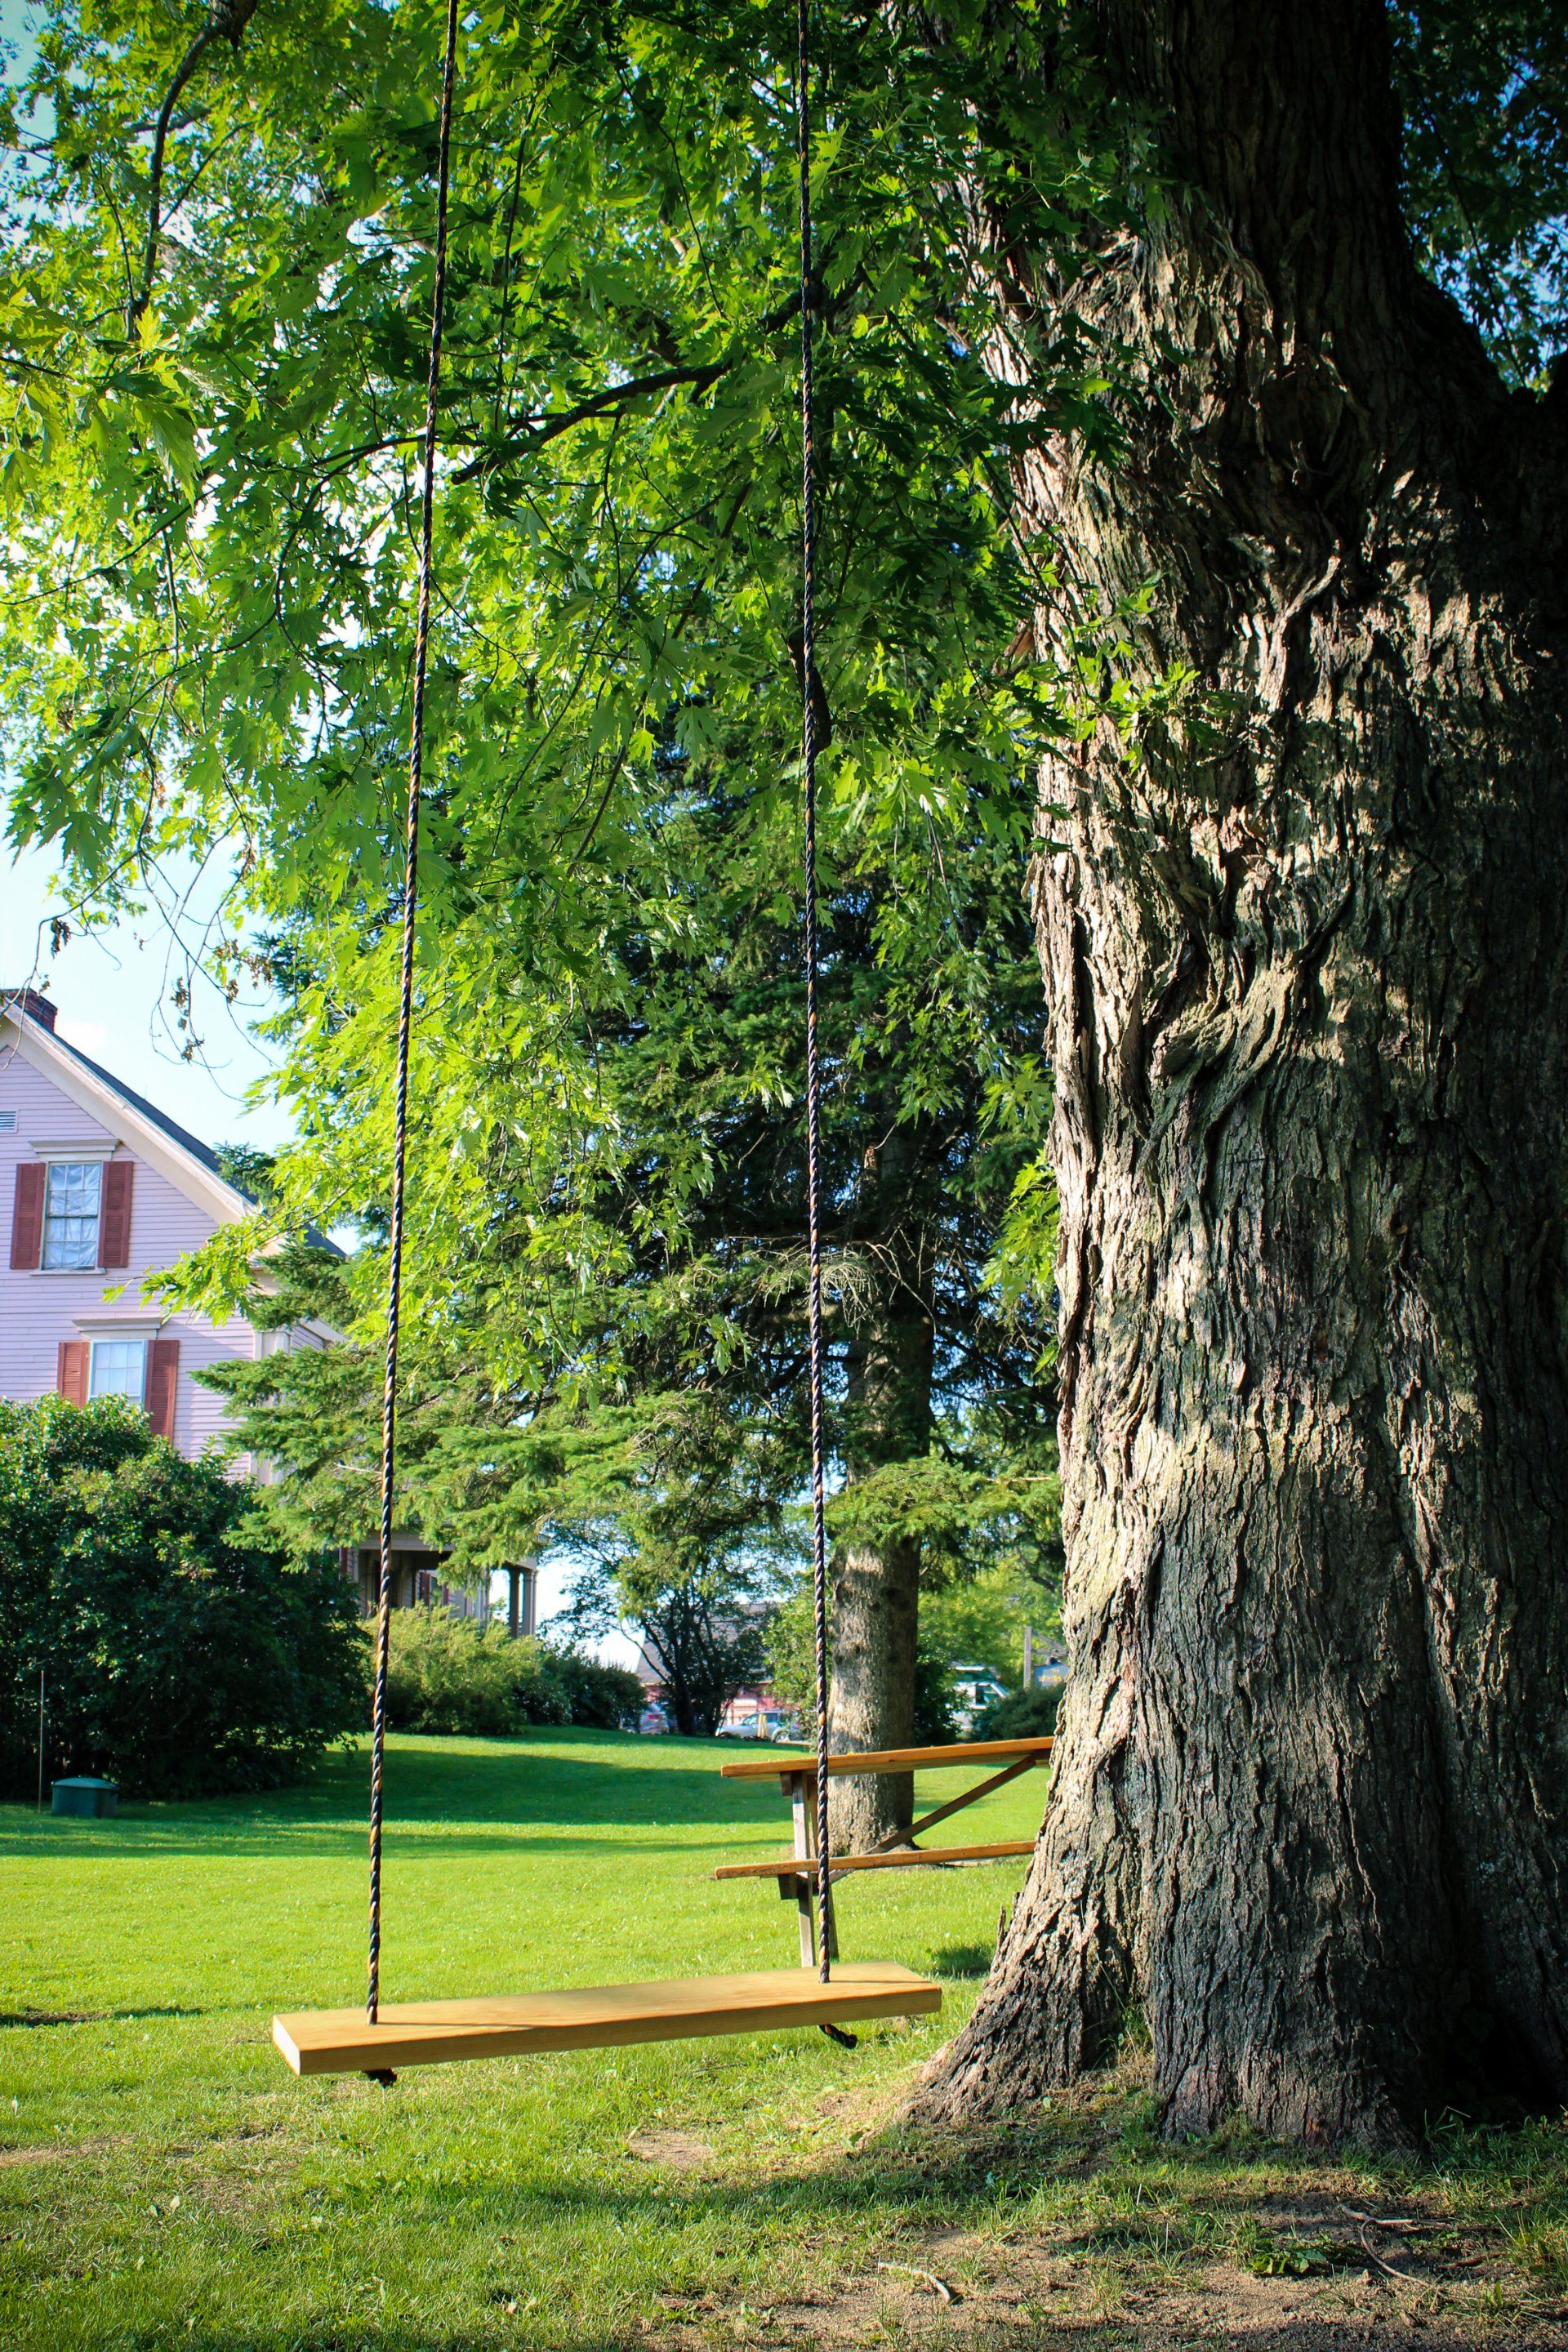 A big maple tree with a wooden swing hanging from its branches